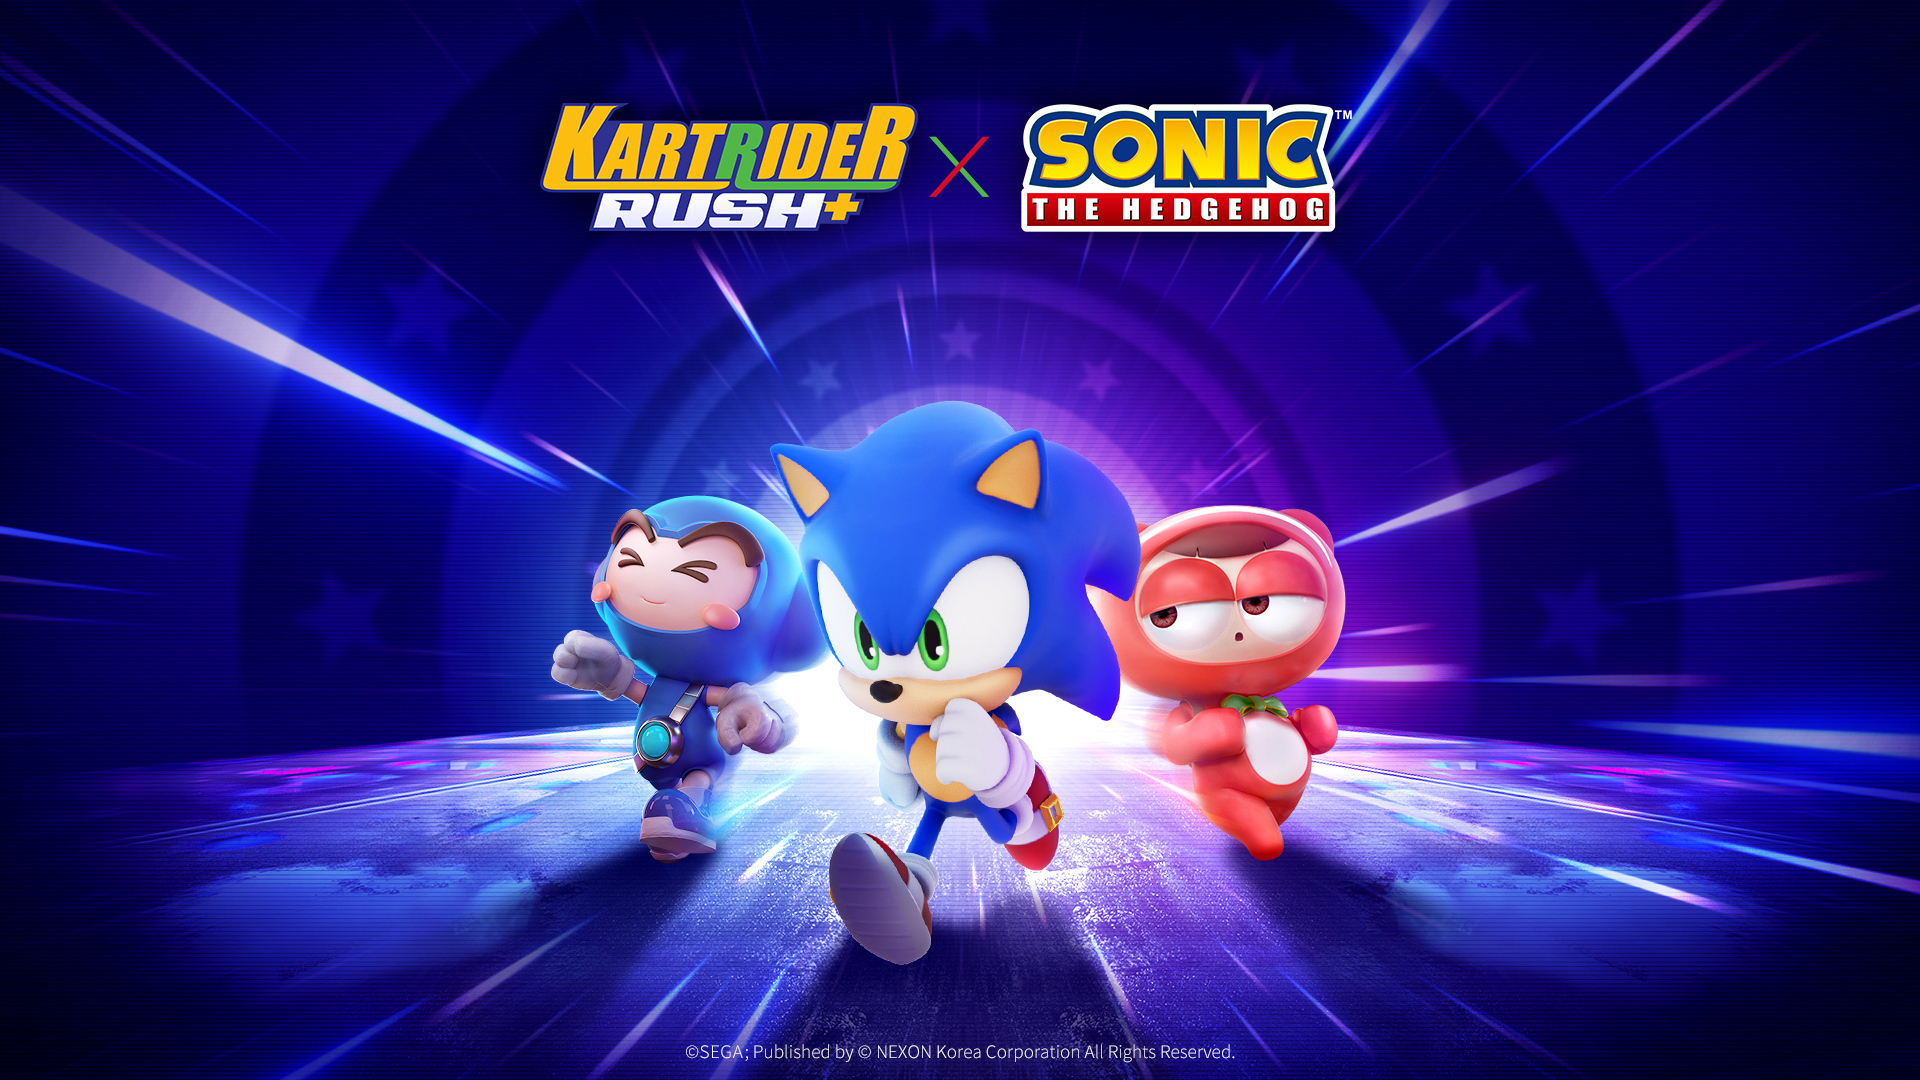 KartRider Rush+ Joins Forces With SEGA's Sonic The Hedgehog